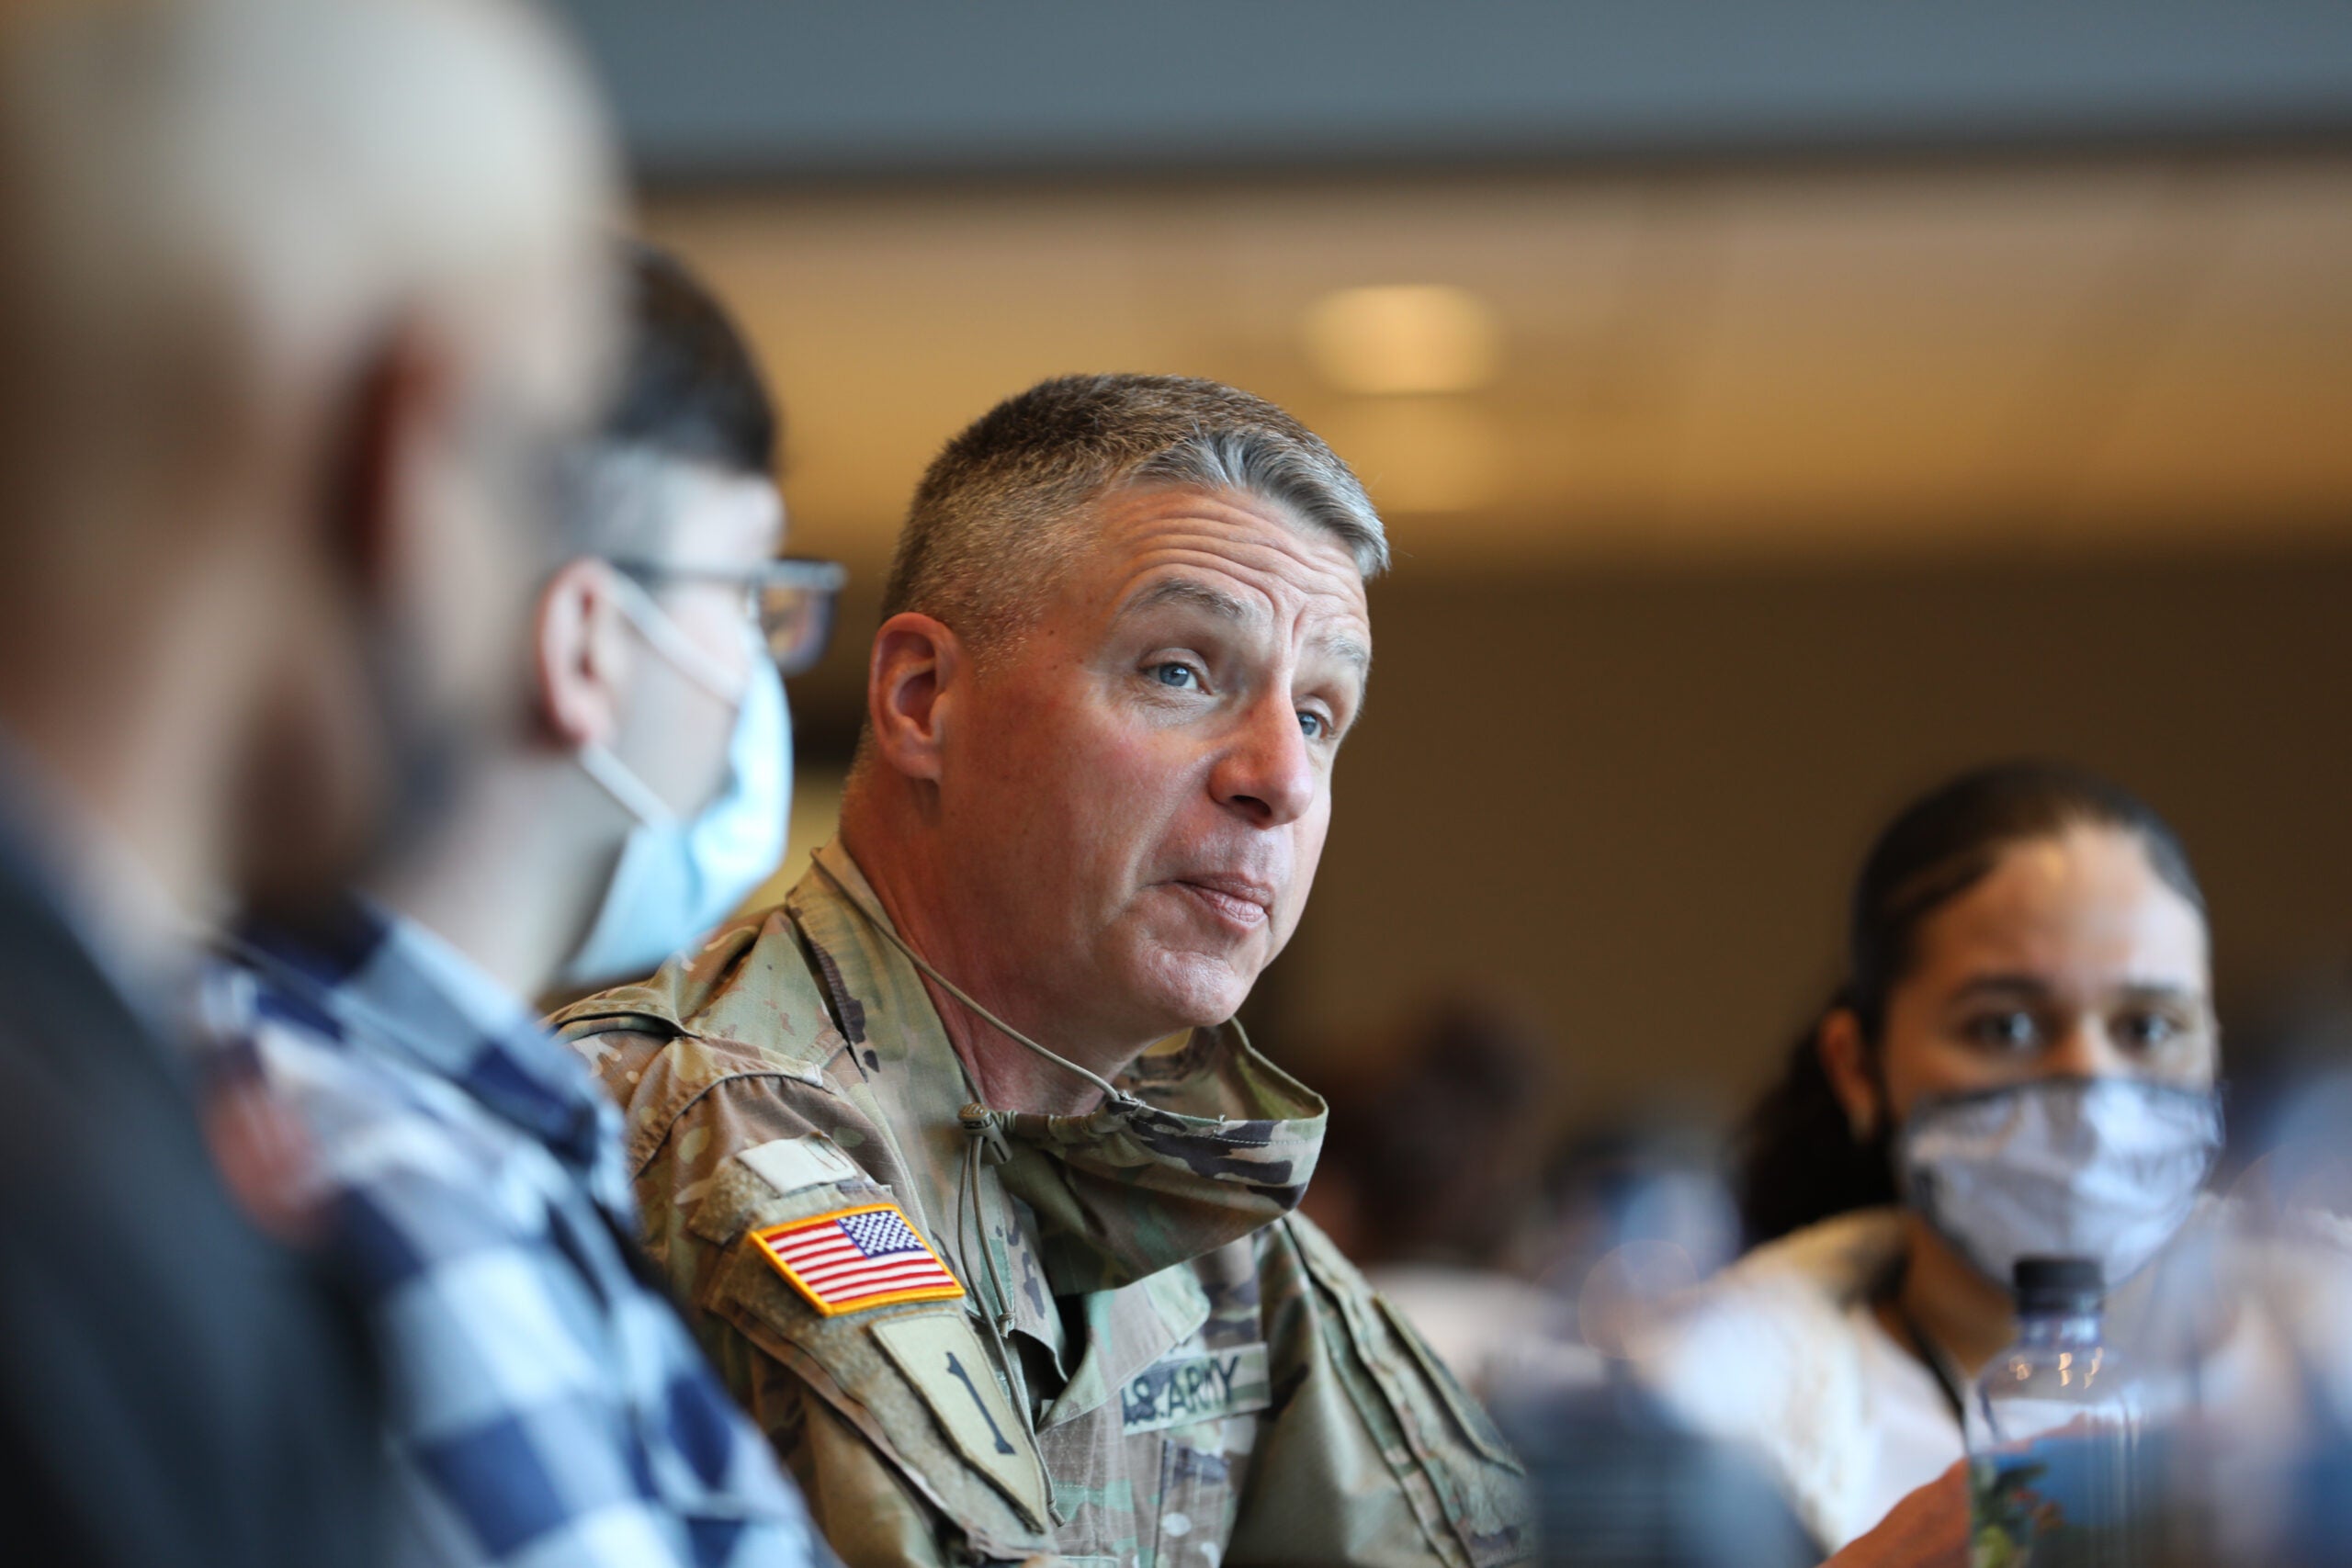 ‘This is an Army problem’ — Service leaders outline plan to address bleak recruiting crisis